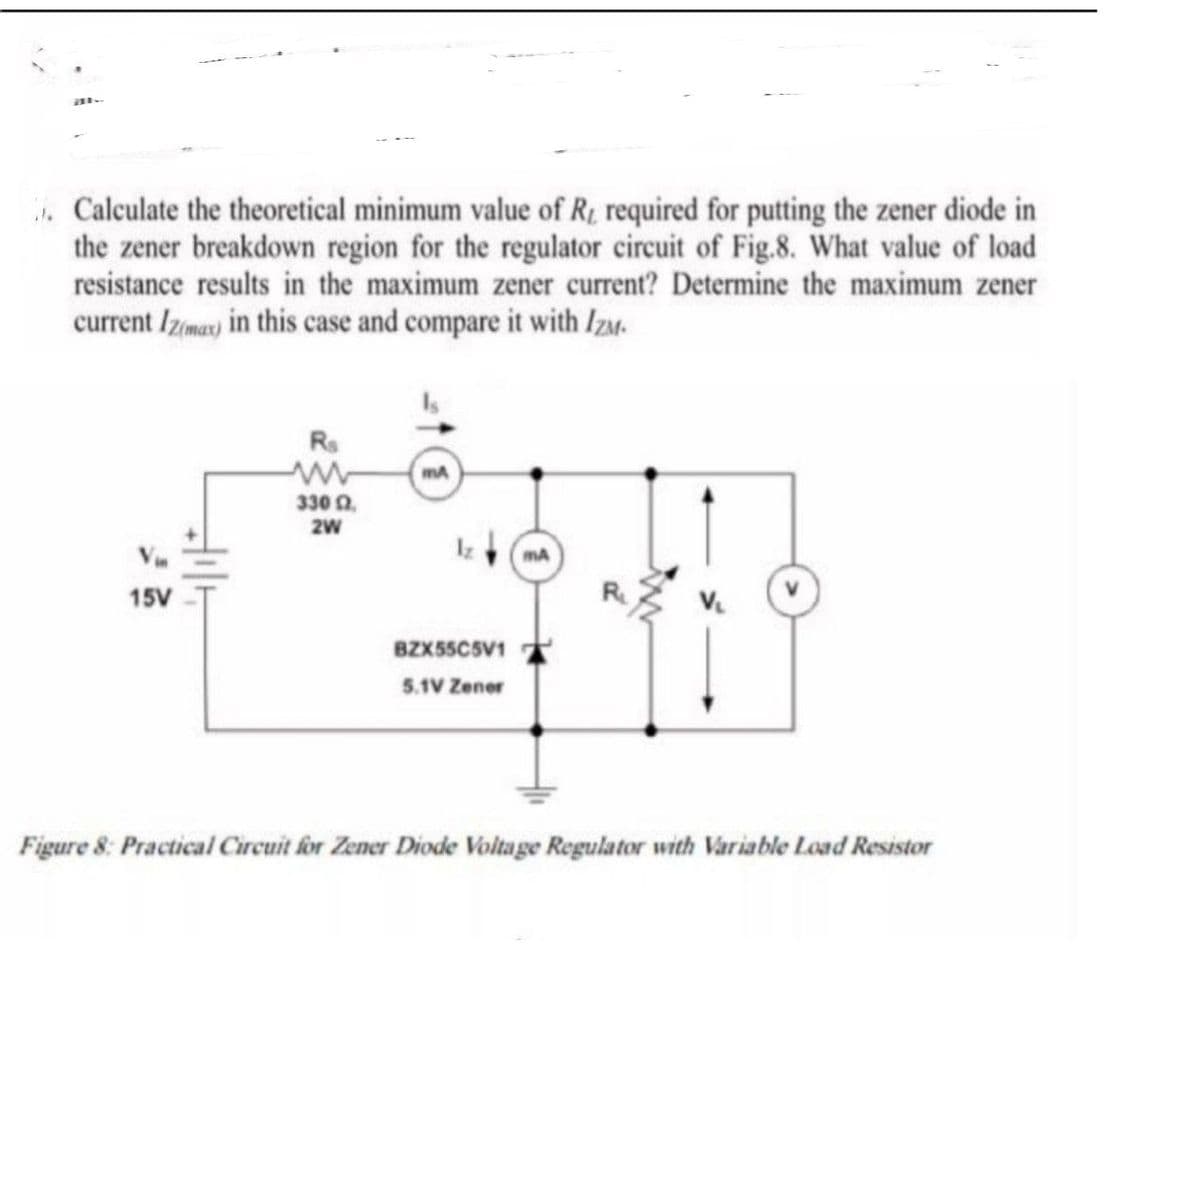 . Calculate the theoretical minimum value of Rt required for putting the zener diode in
the zener breakdown region for the regulator circuit of Fig.8. What value of load
resistance results in the maximum zener current? Determine the maximum zener
current Izma) in this case and compare it with Izu.
Rs
mA
330 0.
V
mA
15V
BZXSSCSV1
5.1V Zener
Figure 8: Practical Circuit for Zener Diode Voltage Regulator with Variable Load Resistor
